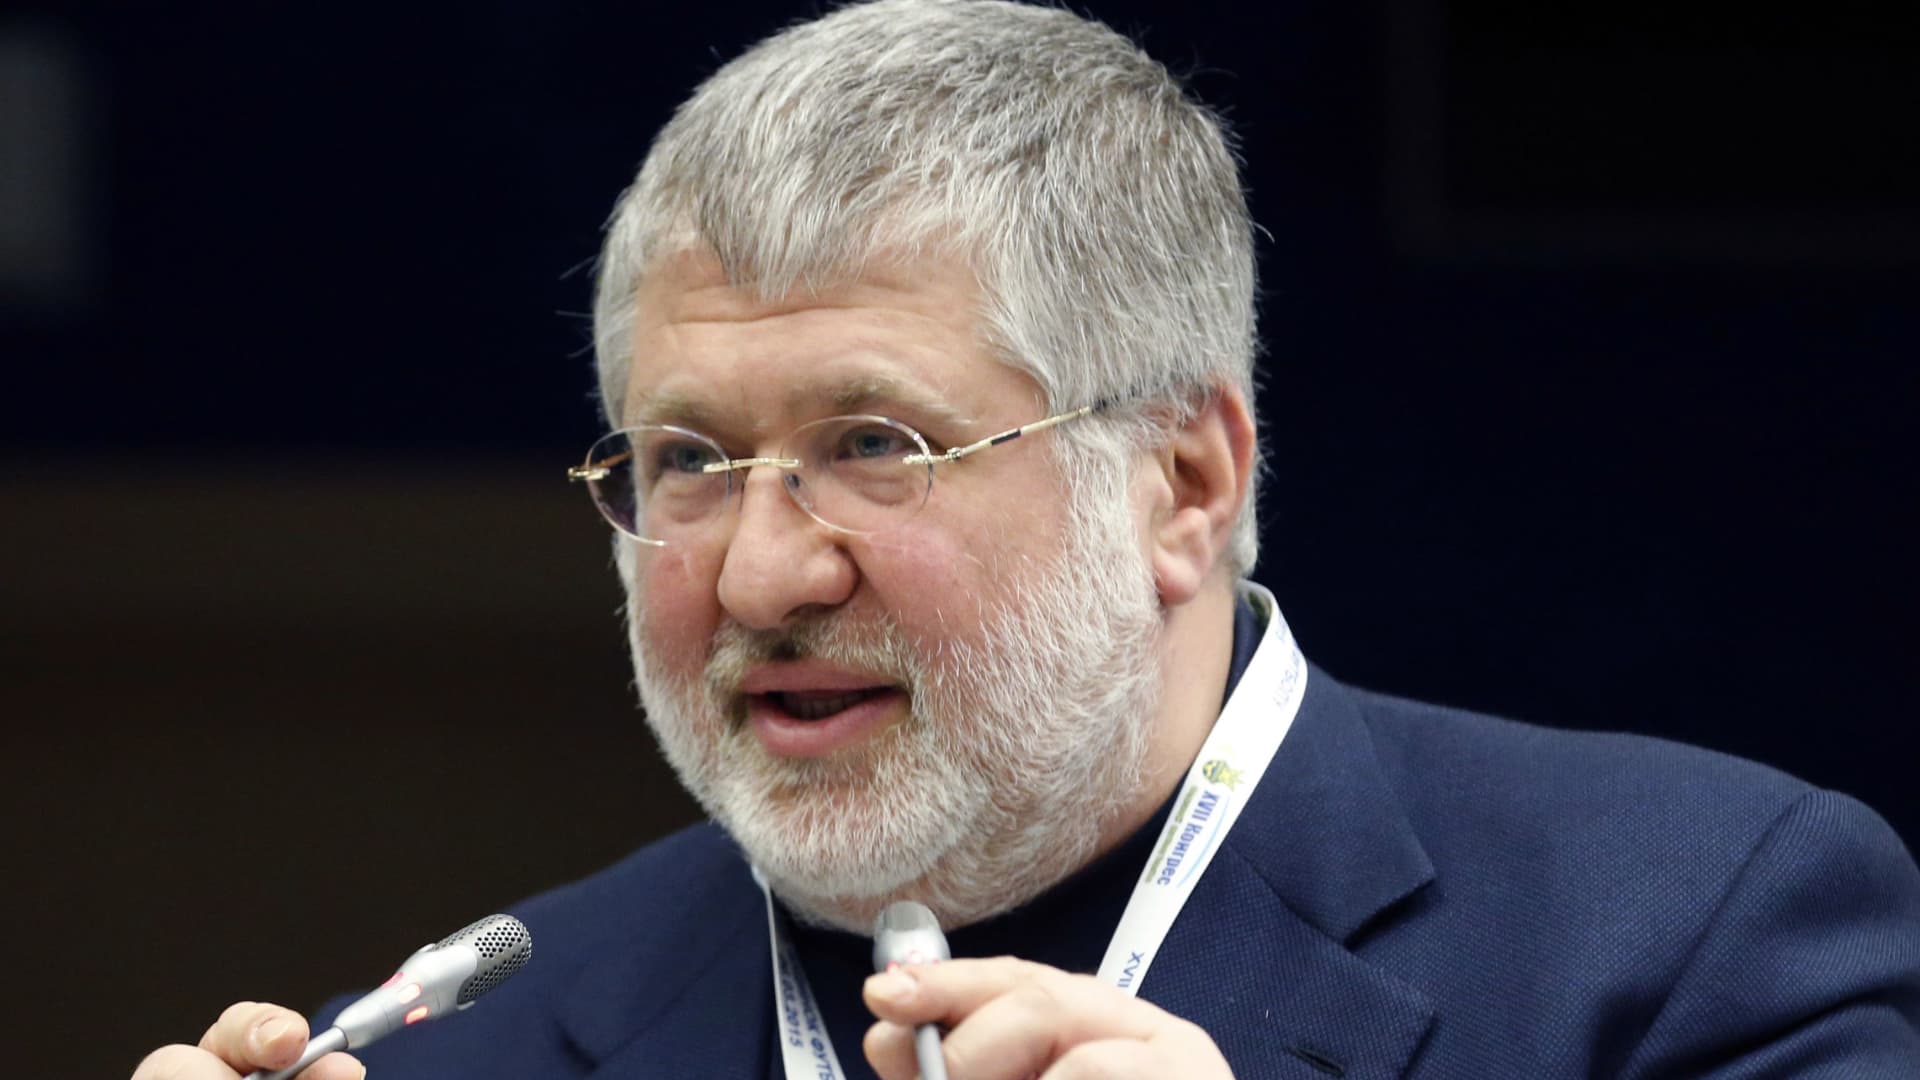 A picture taken on March 2015 by Unian agency shows Ukrainian billionaire Igor Kolomoisky speaking during the Ukrainian Football Federation session in Kiev. Ukraine's president has dismissed Igor Kolomoisky, one of the country's most controversial tycoons from his regional governor's post, his office said on March 25, 2015.